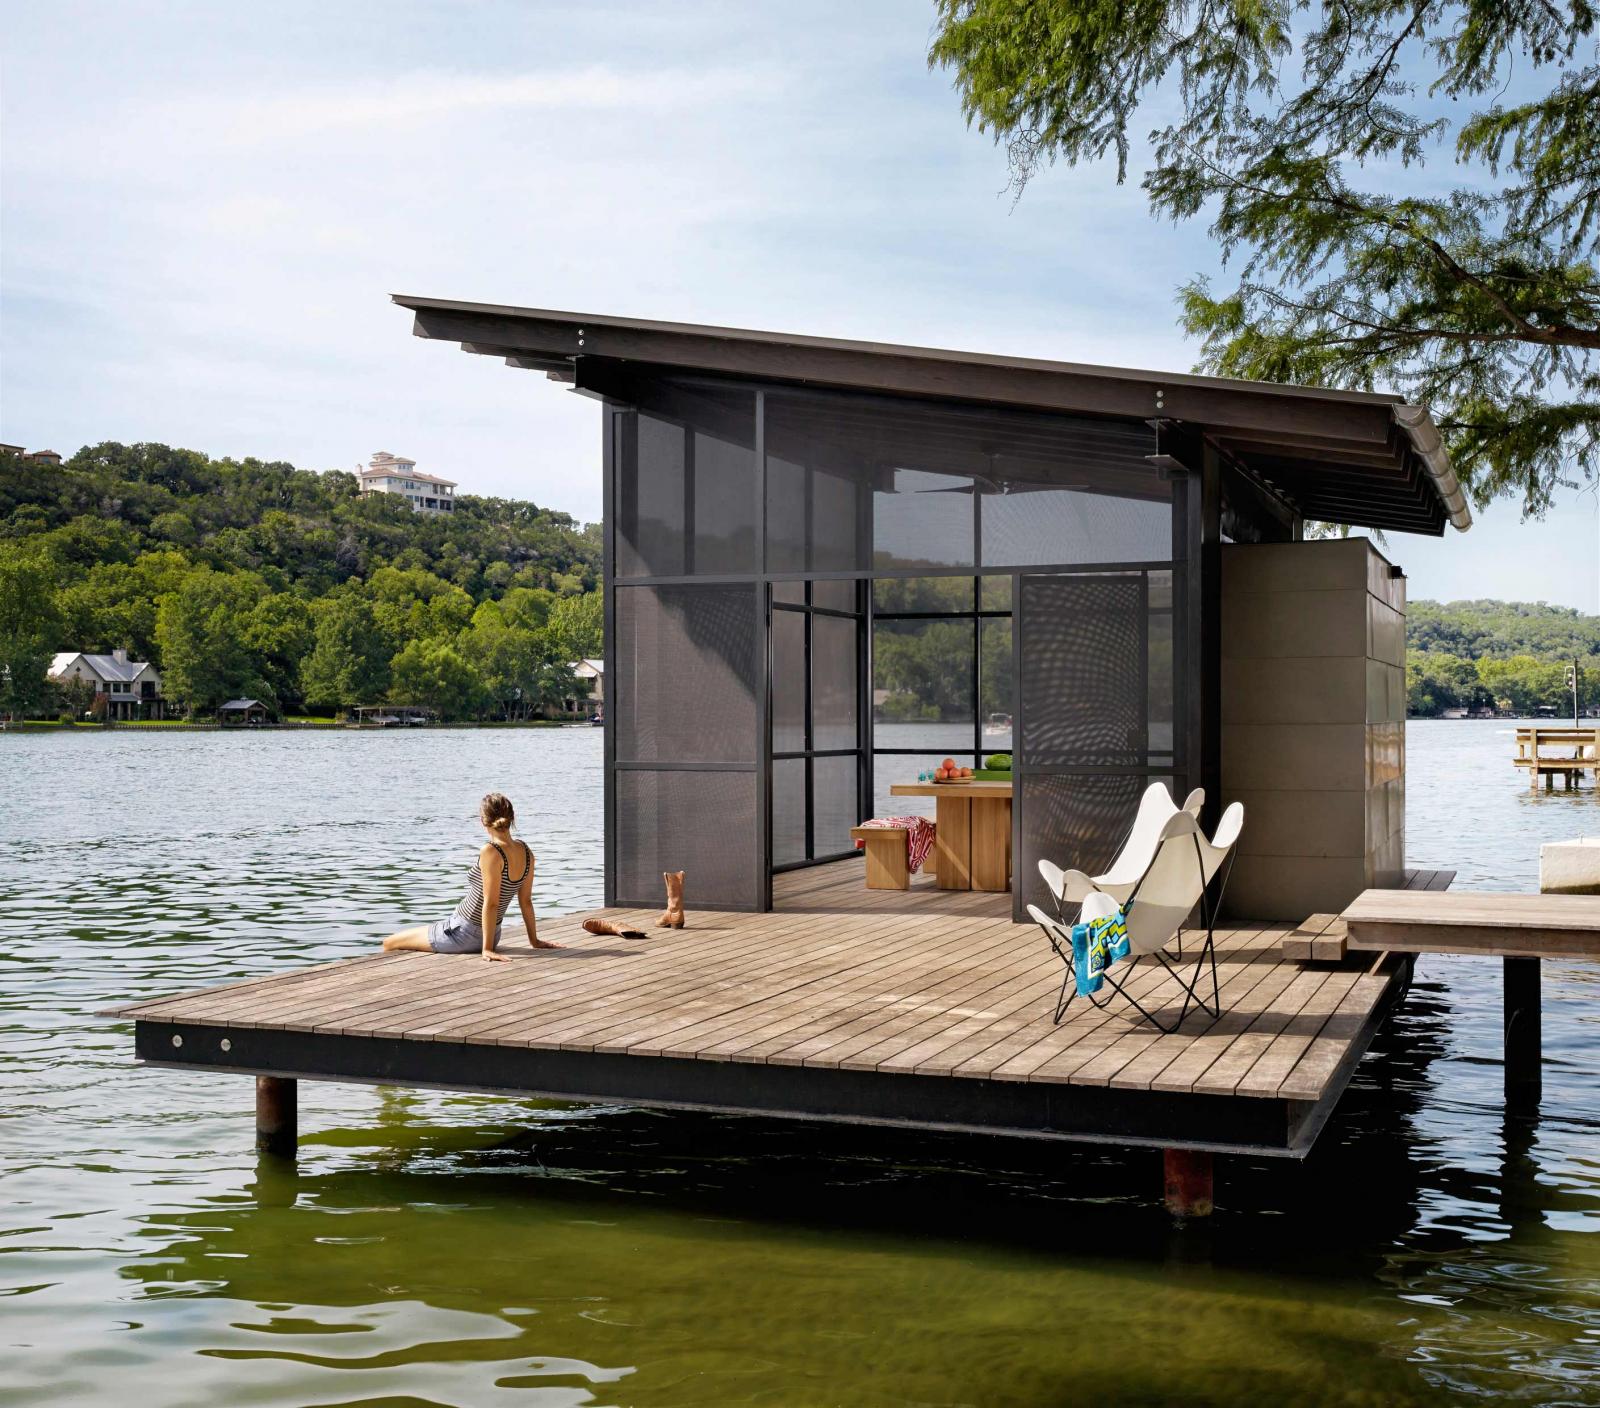 Situated at the confluence of Hog Pen Creek and Lake Austin, a screened pavilion by the water’s edge provides a place that evokes the playfulness of summer on the lake.